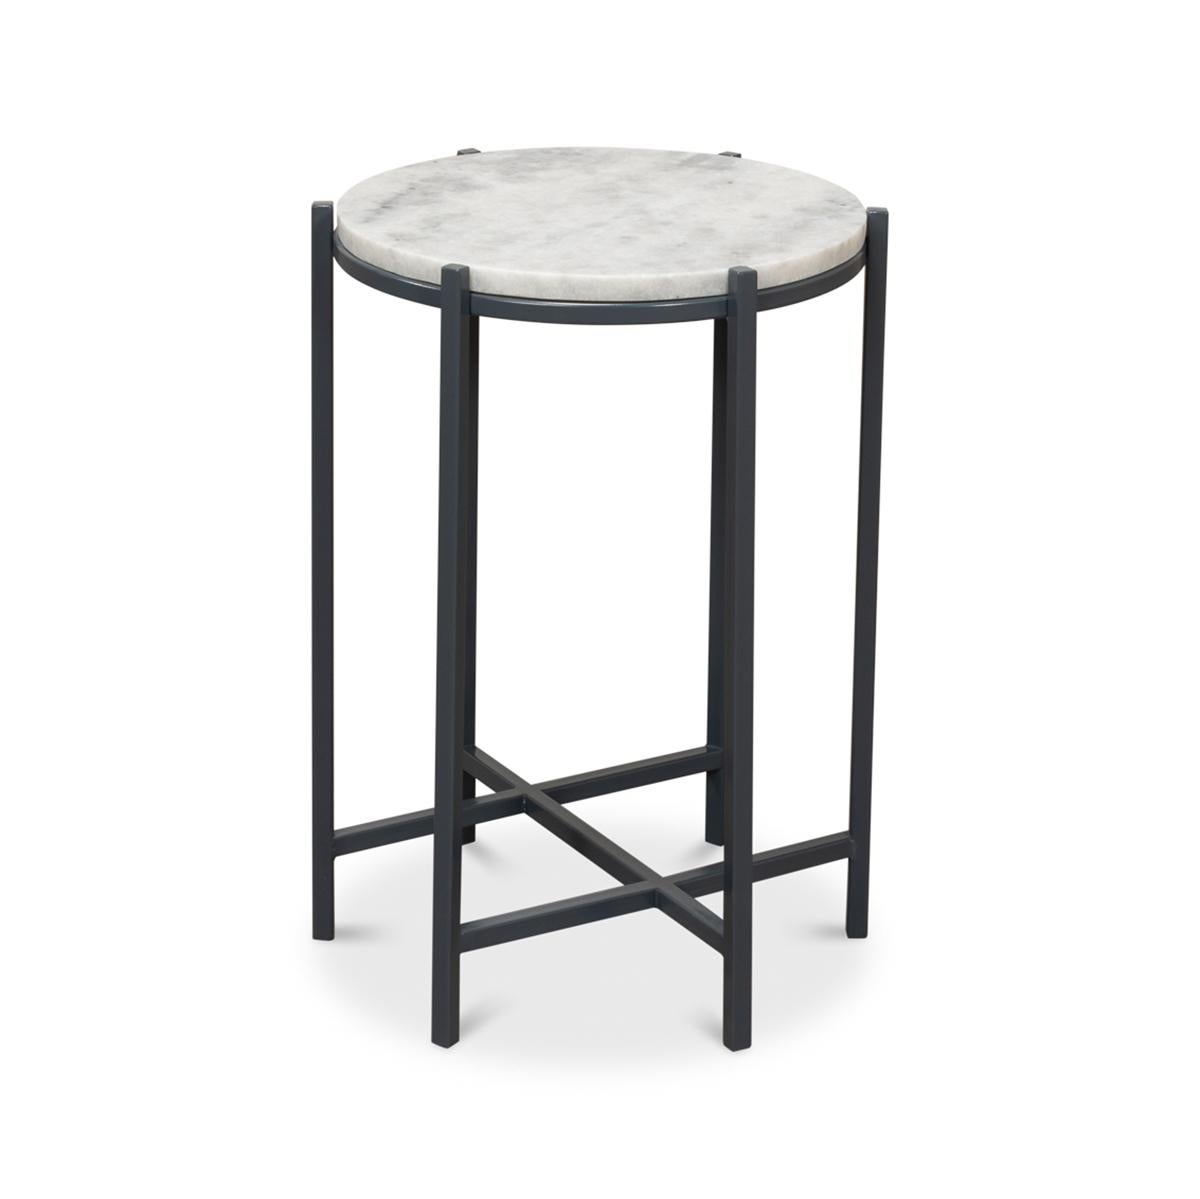 Modern round marble six-legged accent table, with an inset white marble top, above a painted iron six-legged base with a stretcher.

Dimensions: 16